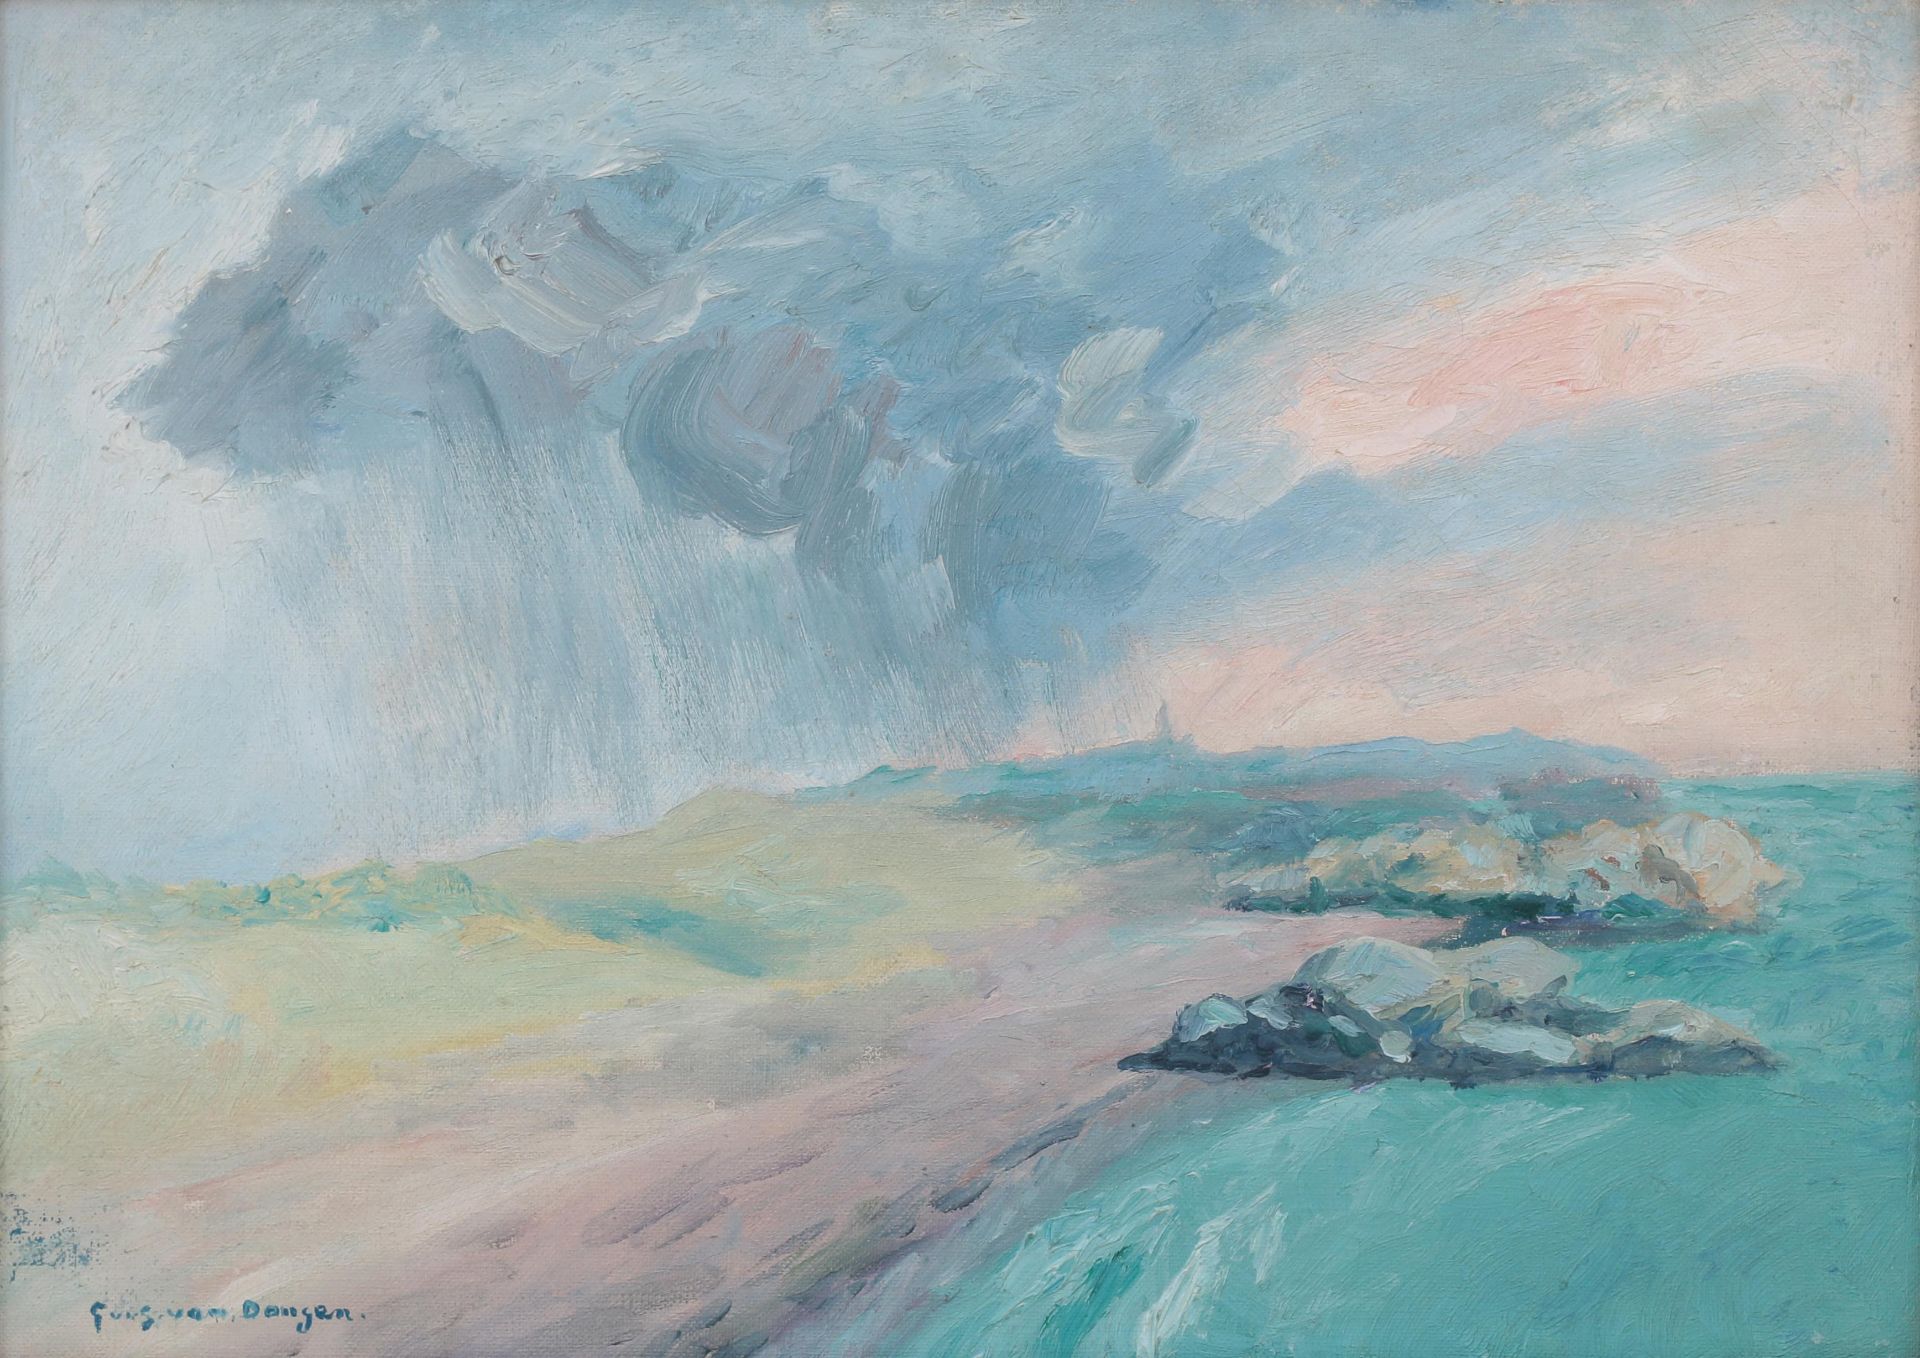 Guus van Dongen (1878-1946) Coastal view with a storm passing over. Signed lower left. Olieverf op